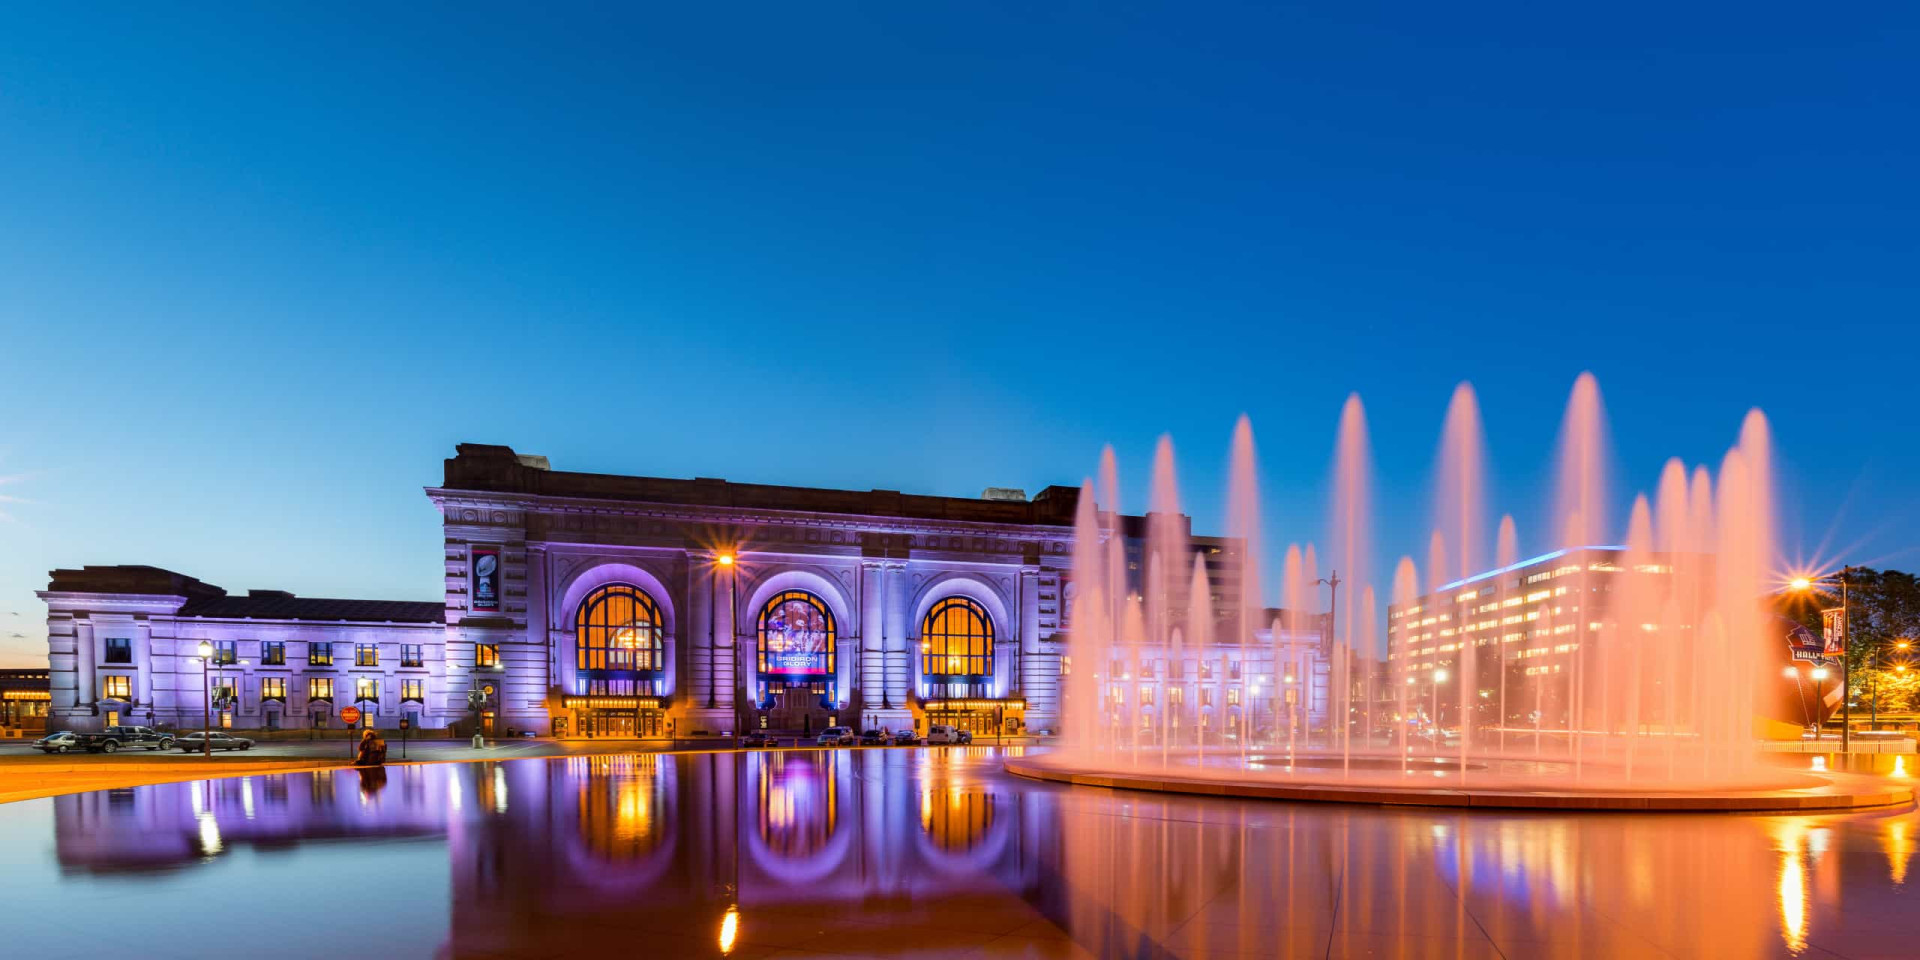 <p>A landmark Kansas City building, Union Station is the largest passenger railway terminal in the western United States. Built in 1939, its striking Mission Moderne architectural style makes it a tourist attraction in its own right.</p><p>You may also like:<a href="https://www.starsinsider.com/n/432830?utm_source=msn.com&utm_medium=display&utm_campaign=referral_description&utm_content=486112v1en-us"> 100 of the most famous faces we've lost in 2020</a></p>